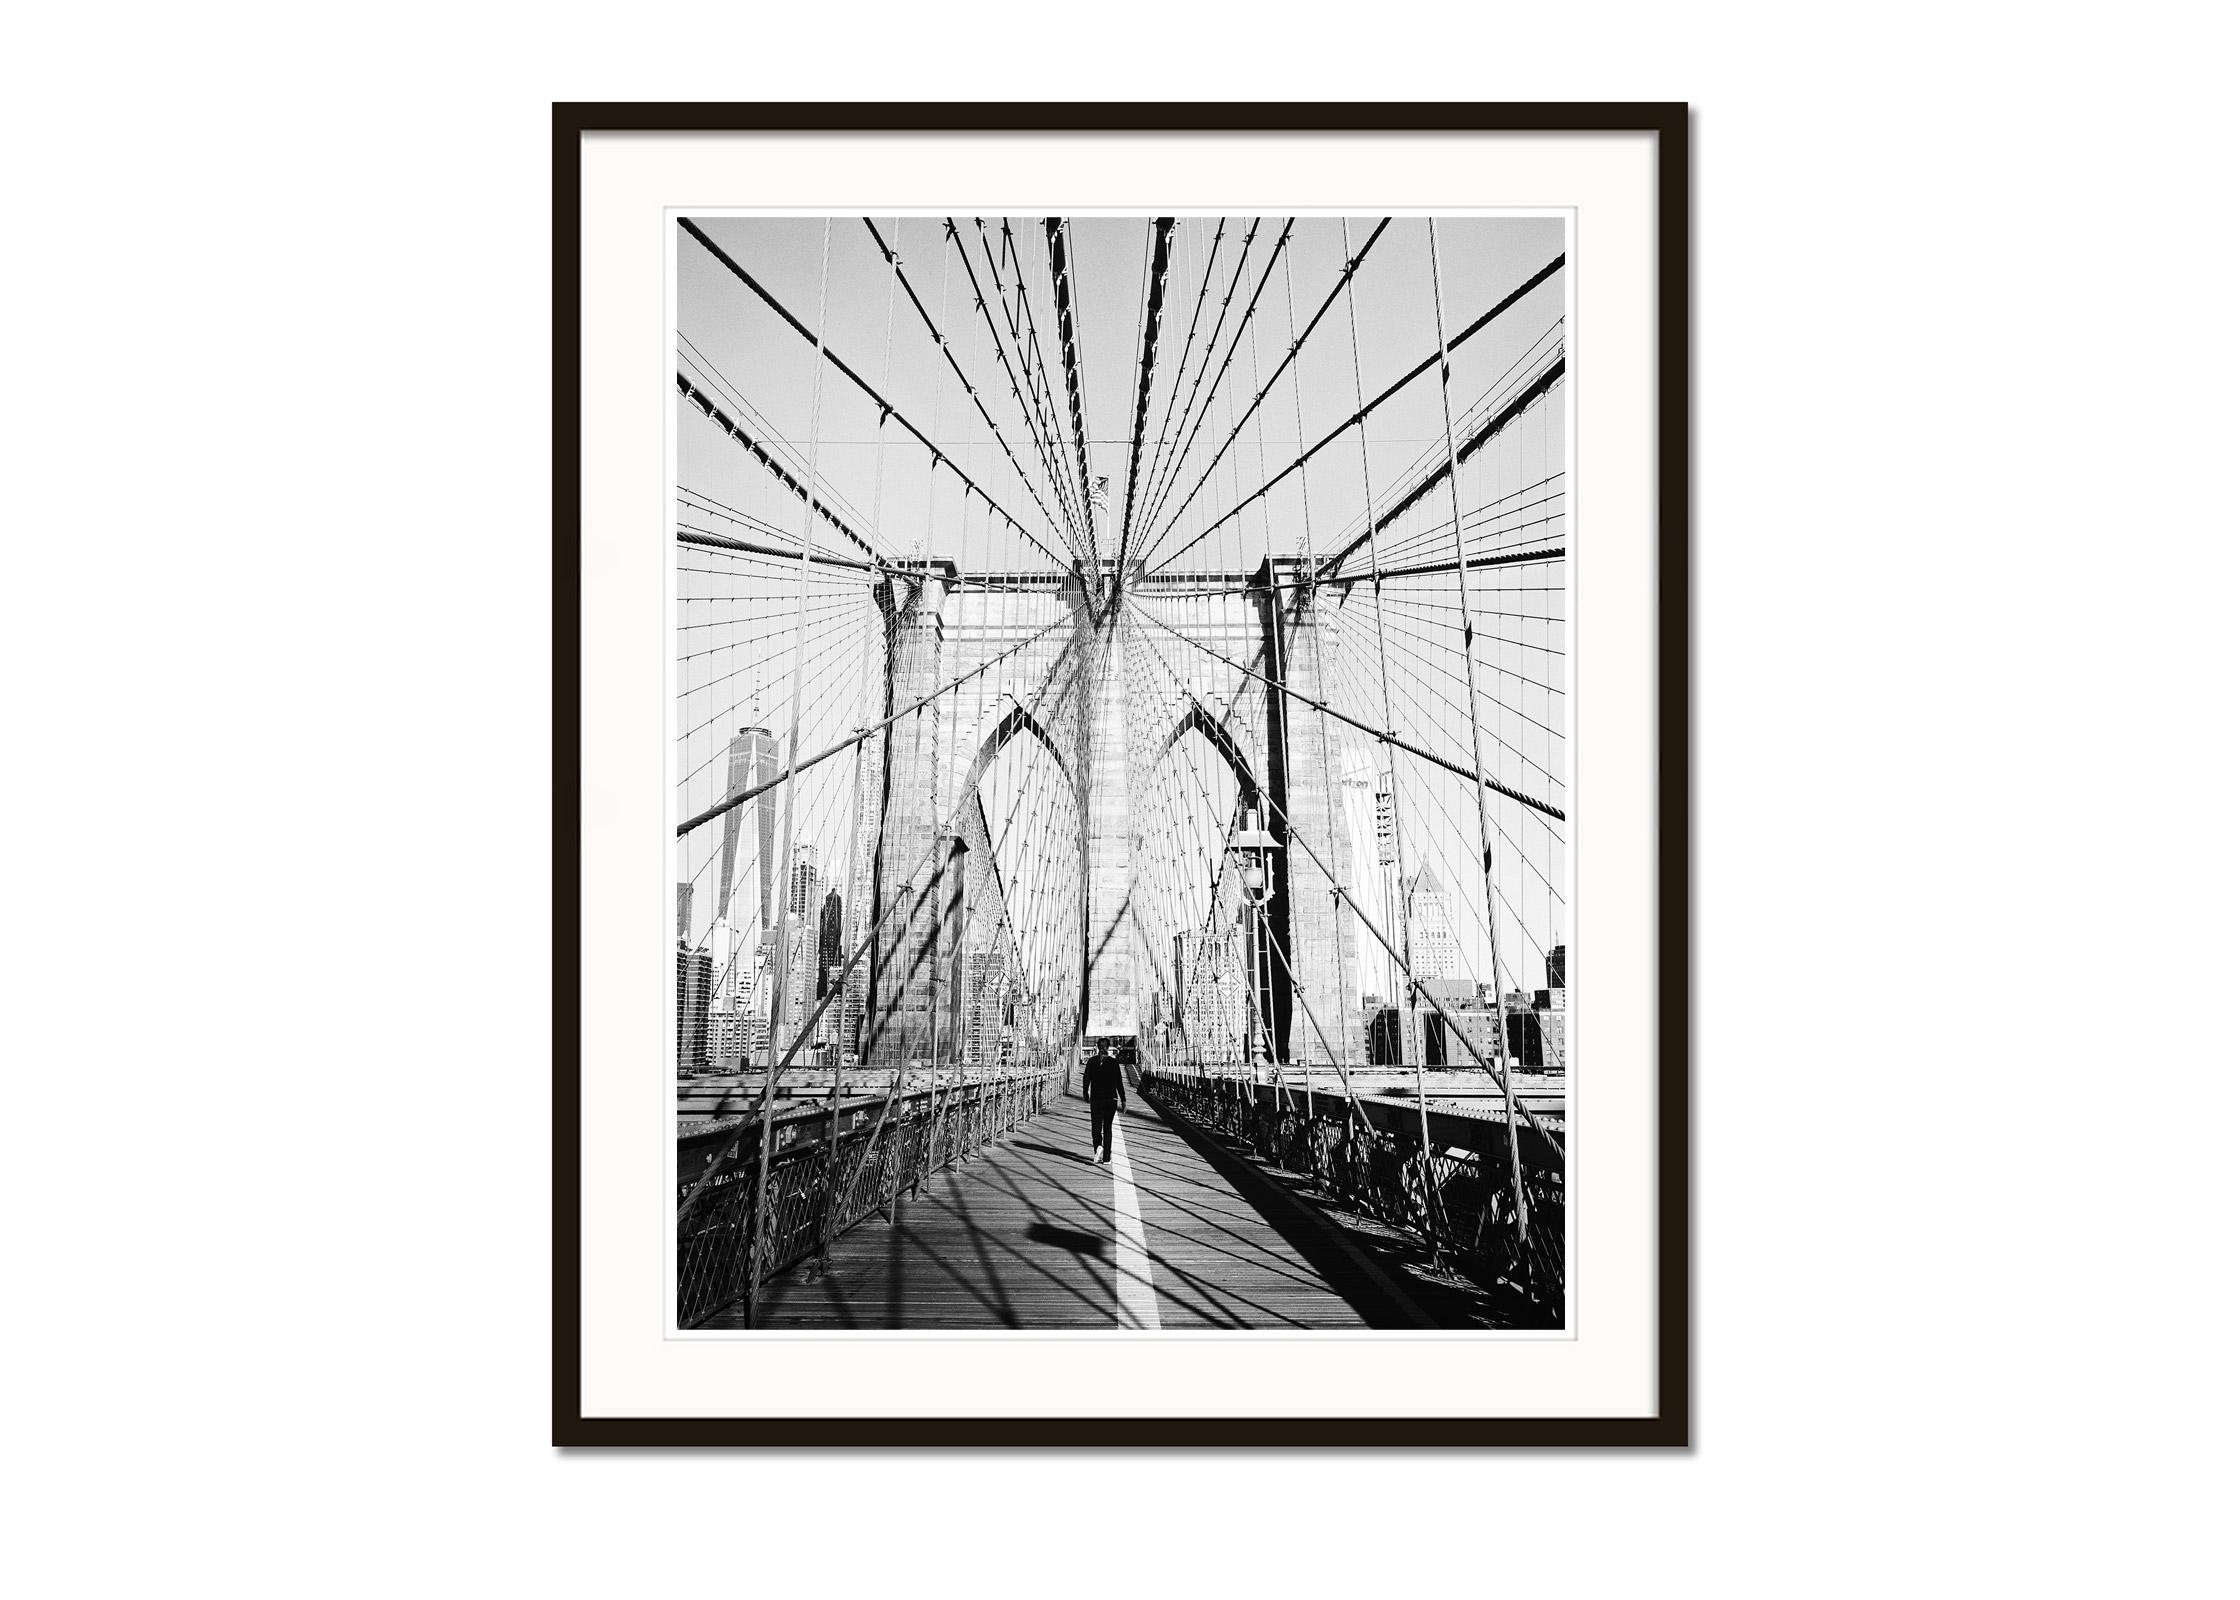 Black and White Fine Art Cityscape Photography. Walkers on Brooklyn bridge in morning light, New York City, USA. Archival pigment ink print, edition of 7. Signed, titled, dated and numbered by artist. Certificate of authenticity included. Printed